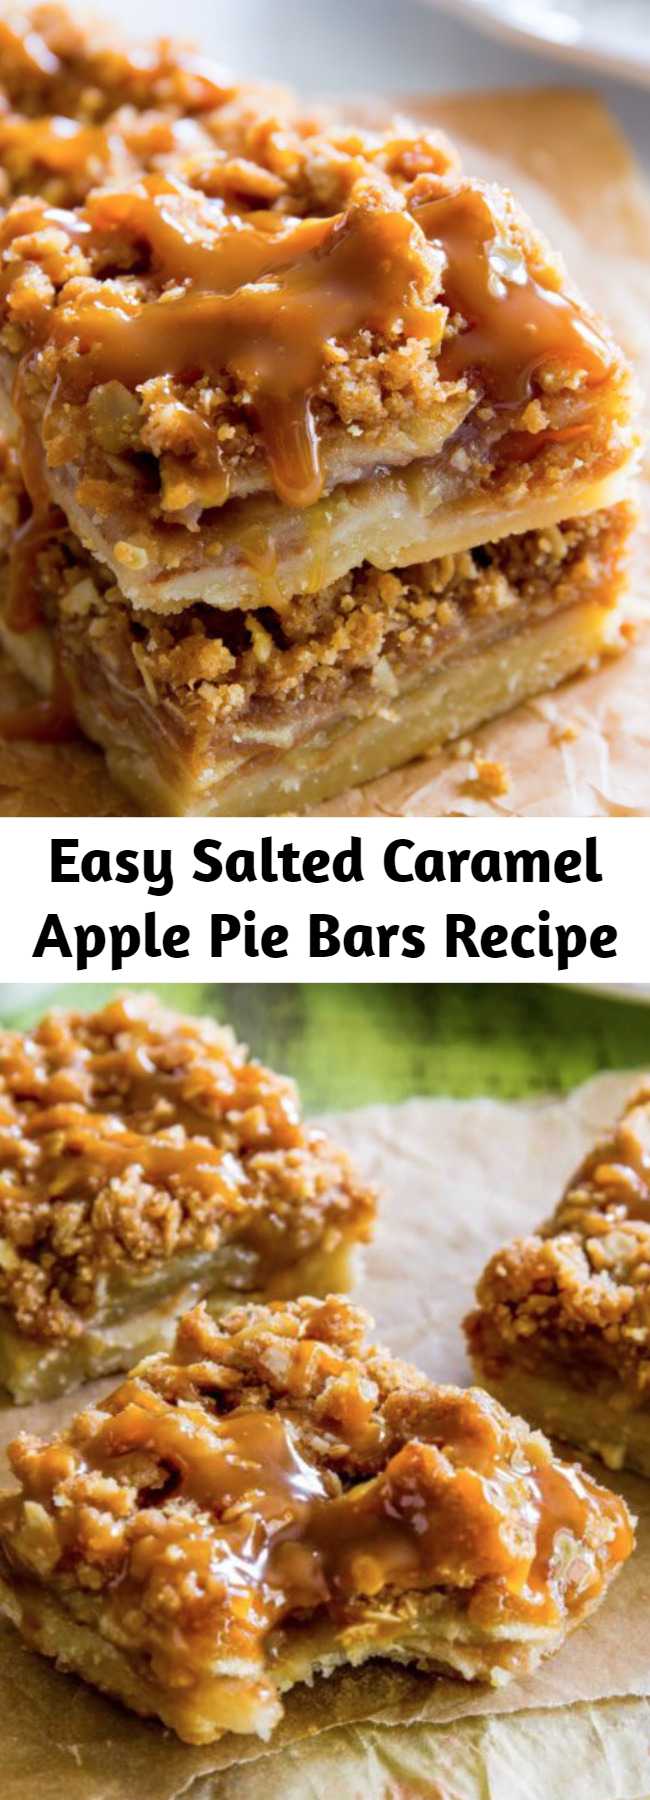 Easy Salted Caramel Apple Pie Bars Recipe - Made with a shortbread crust, spiced apple filling, streusel topping, and homemade salted caramel, apple pie bars are just as delicious as apple pie, but much simpler to make. You’ll love this fun twist on a classic dessert!